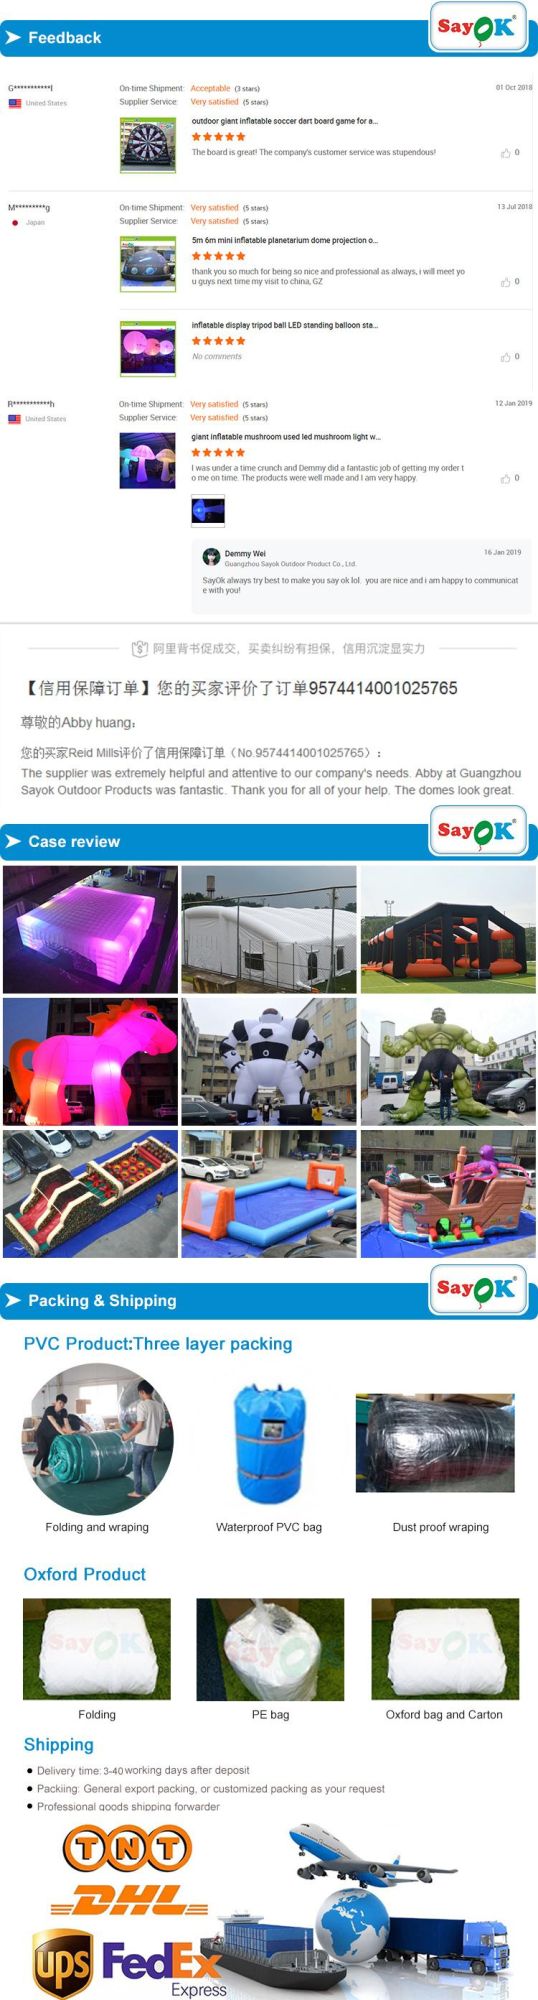 Inflatable Football Shoot Target Inflatable Soccer Cage Sport Game